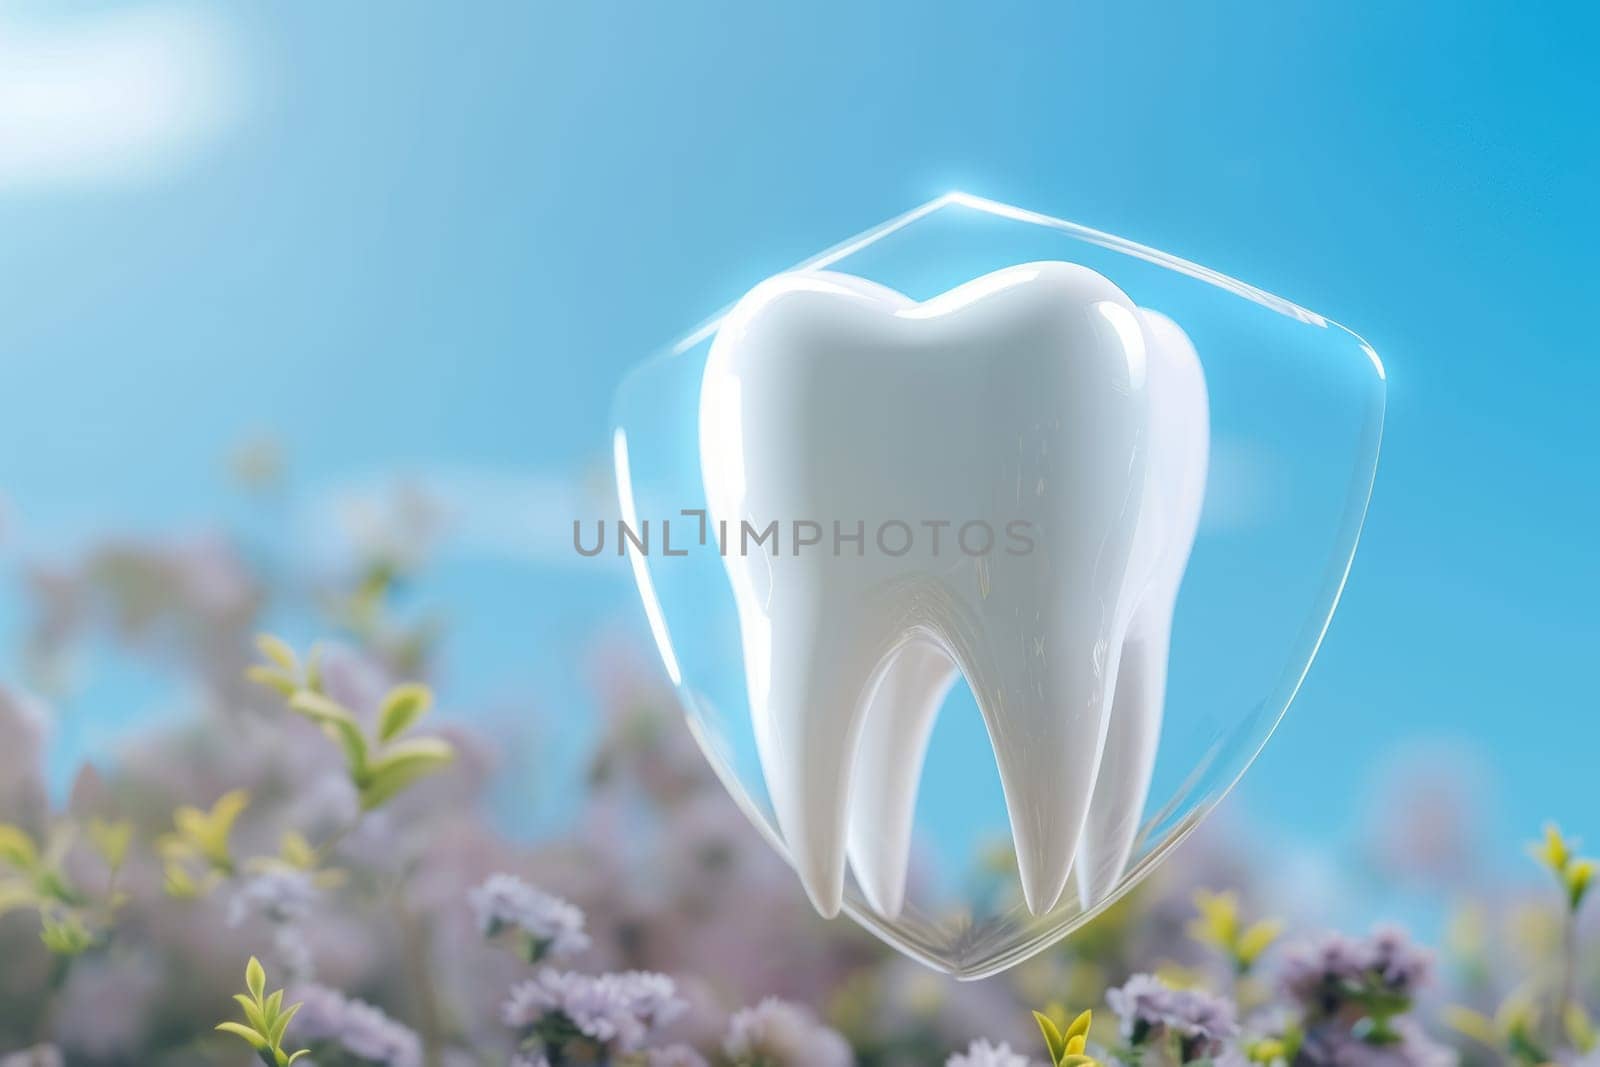 A concept image featuring a shield superimposed over a tooth against a clear blue sky, symbolizing dental protection